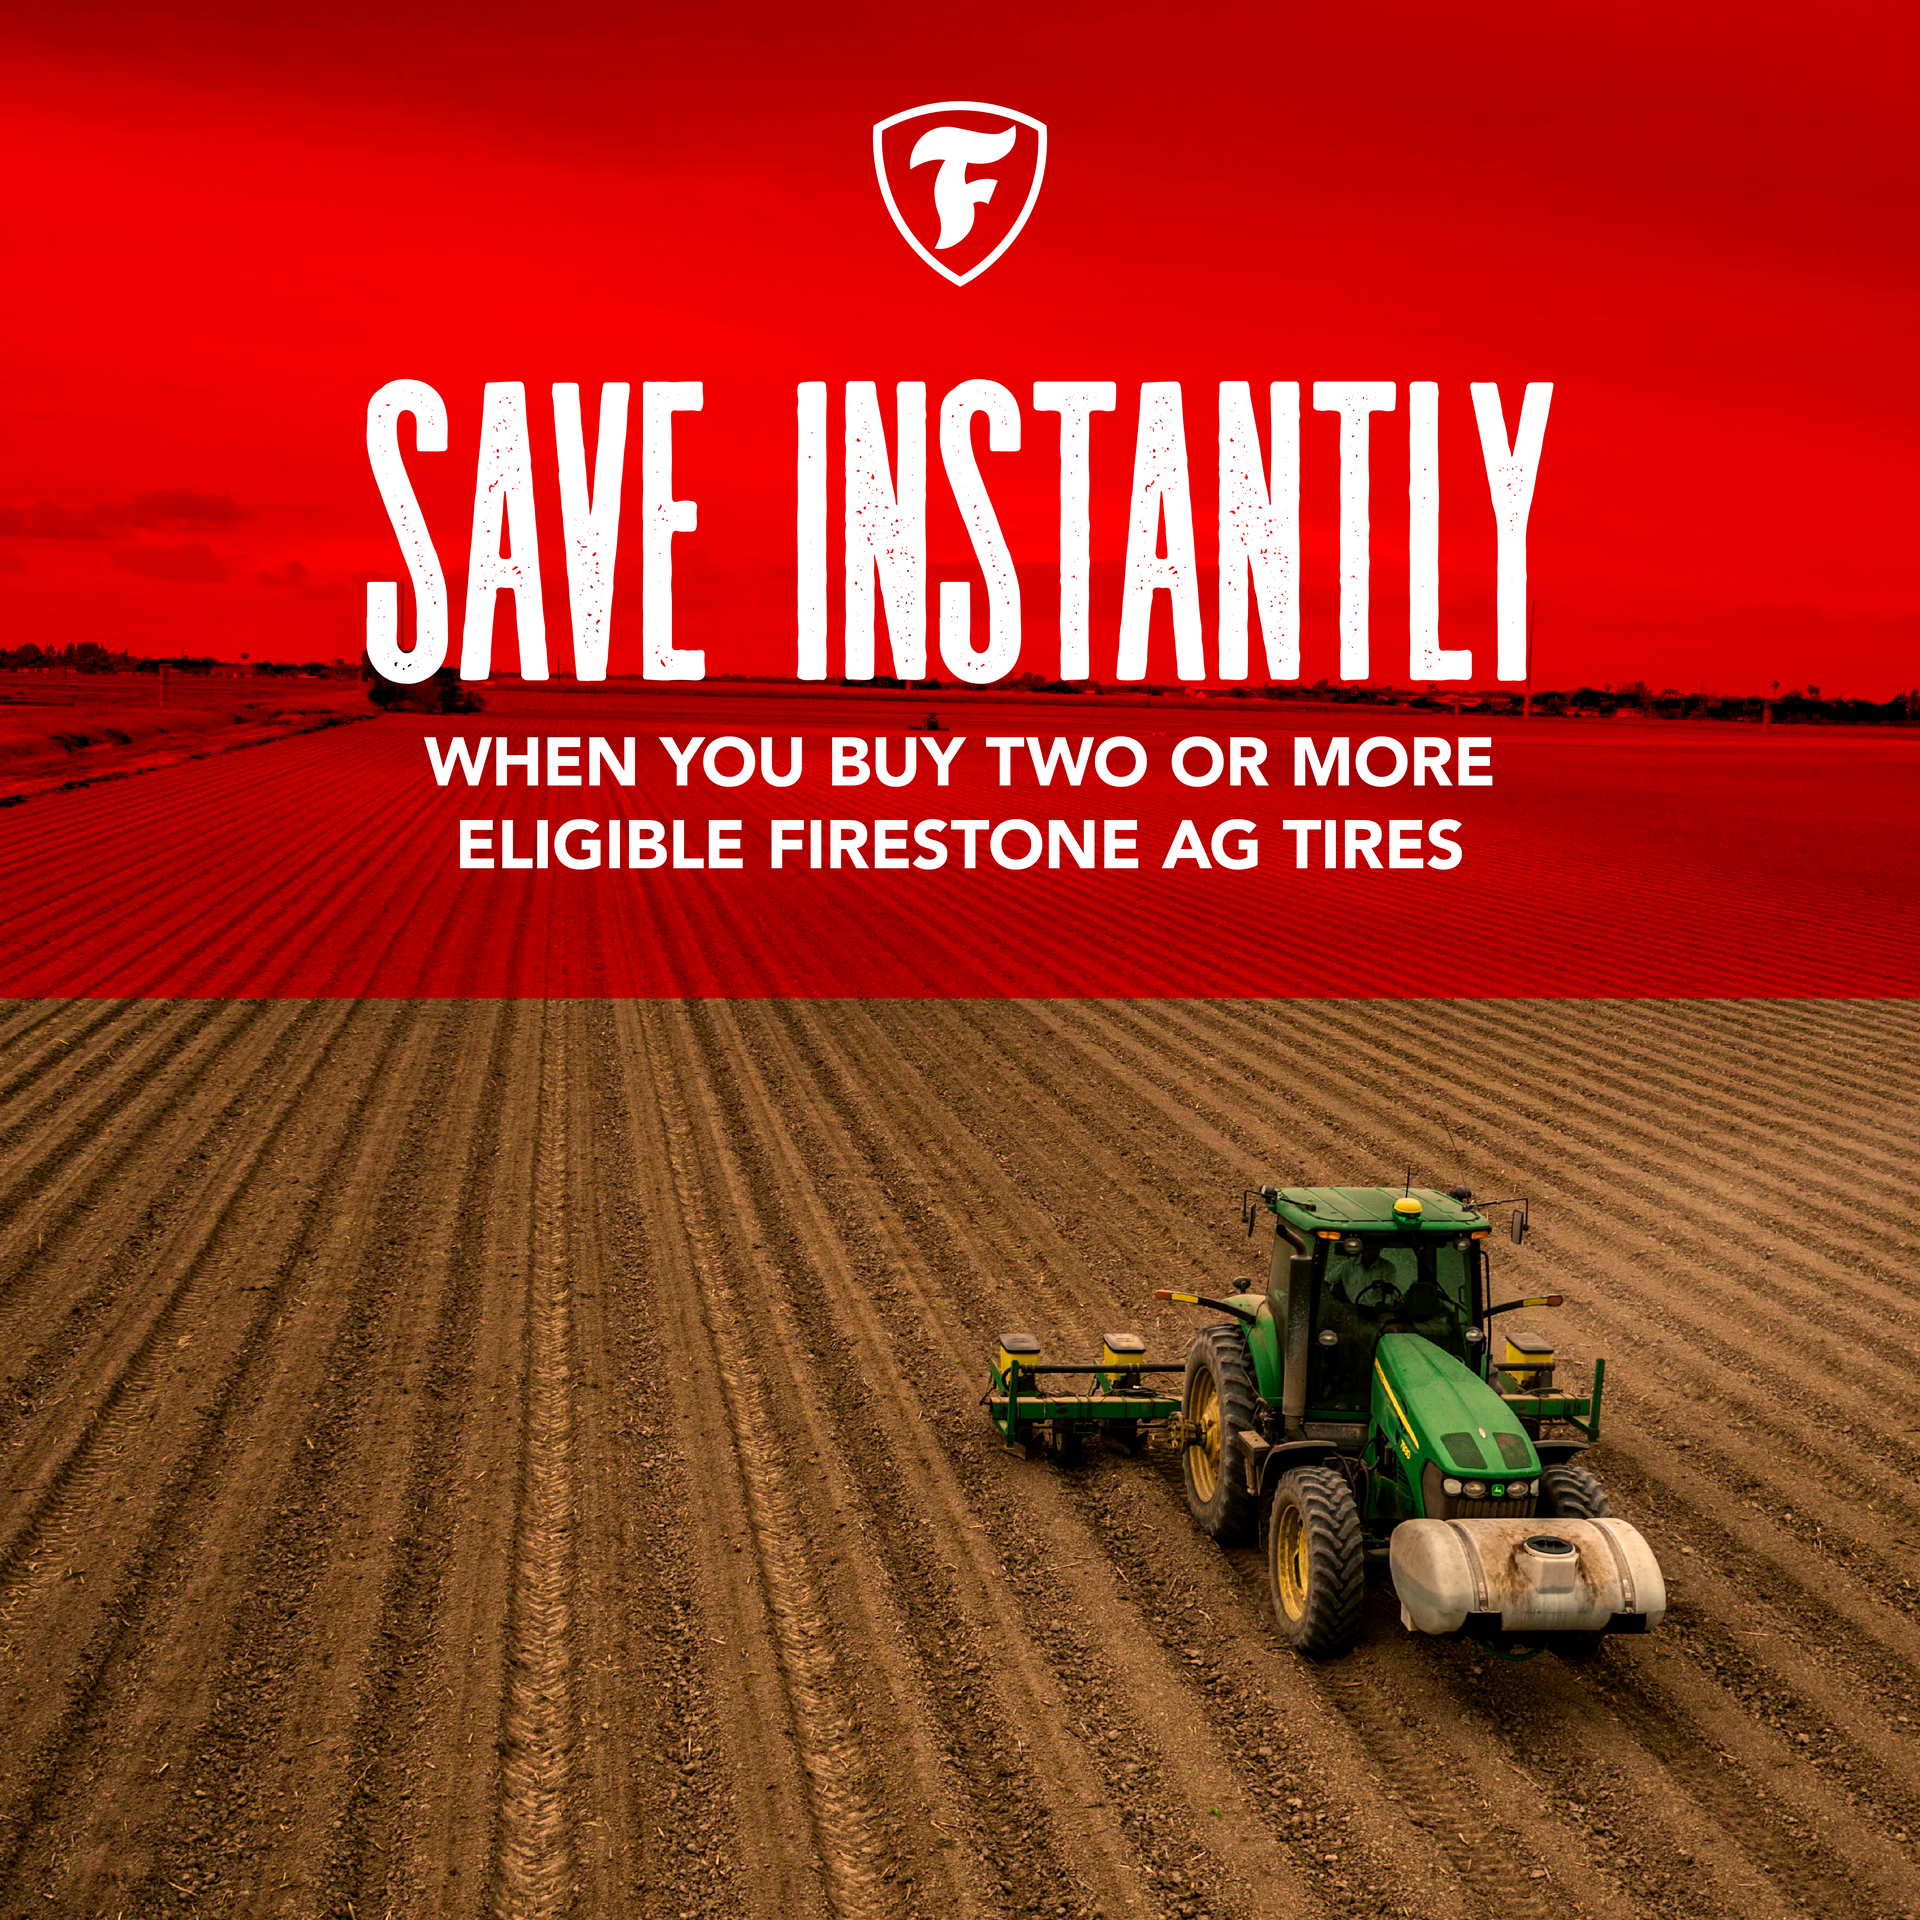 Save Instantly when you buy two or more eligible Firestone AG Tires